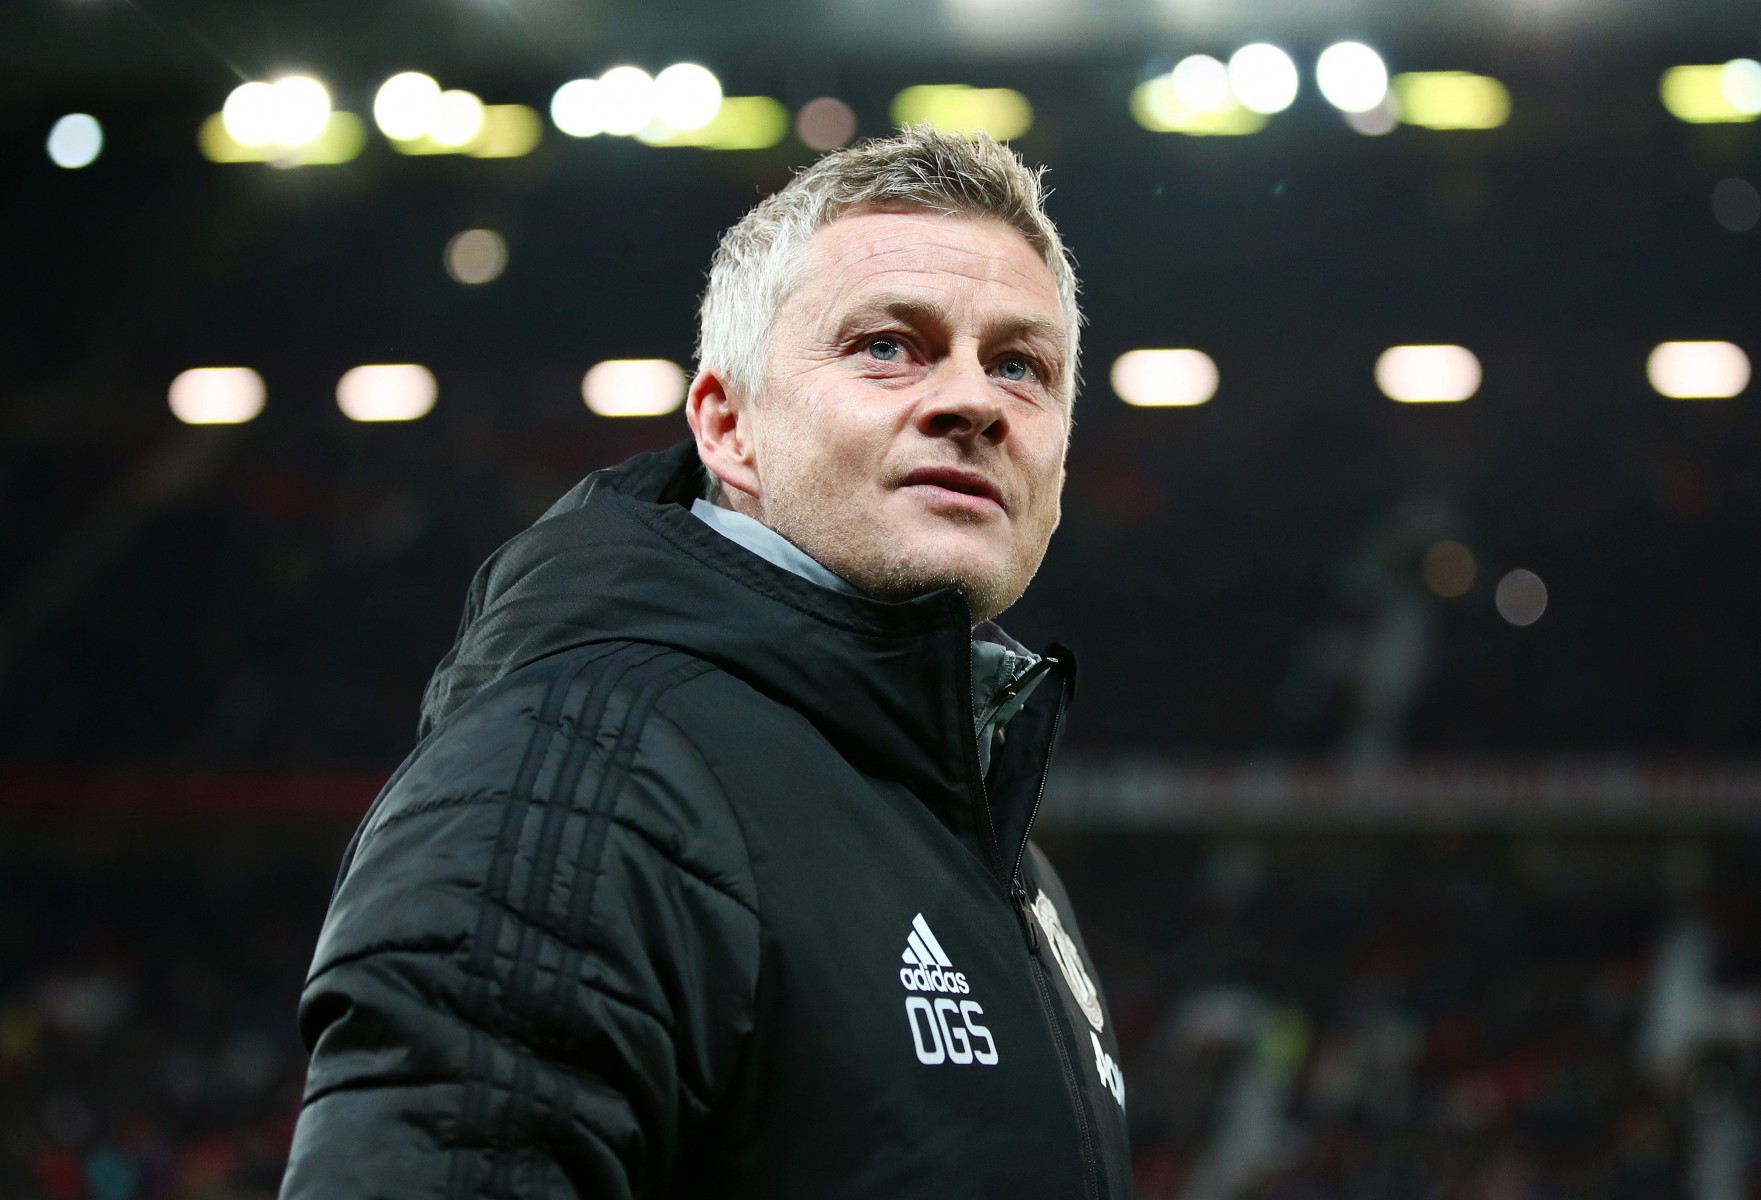 , Solskjaer reveals Man Utd stars werent working hard enough when he took over from Mourinho but are now on right track